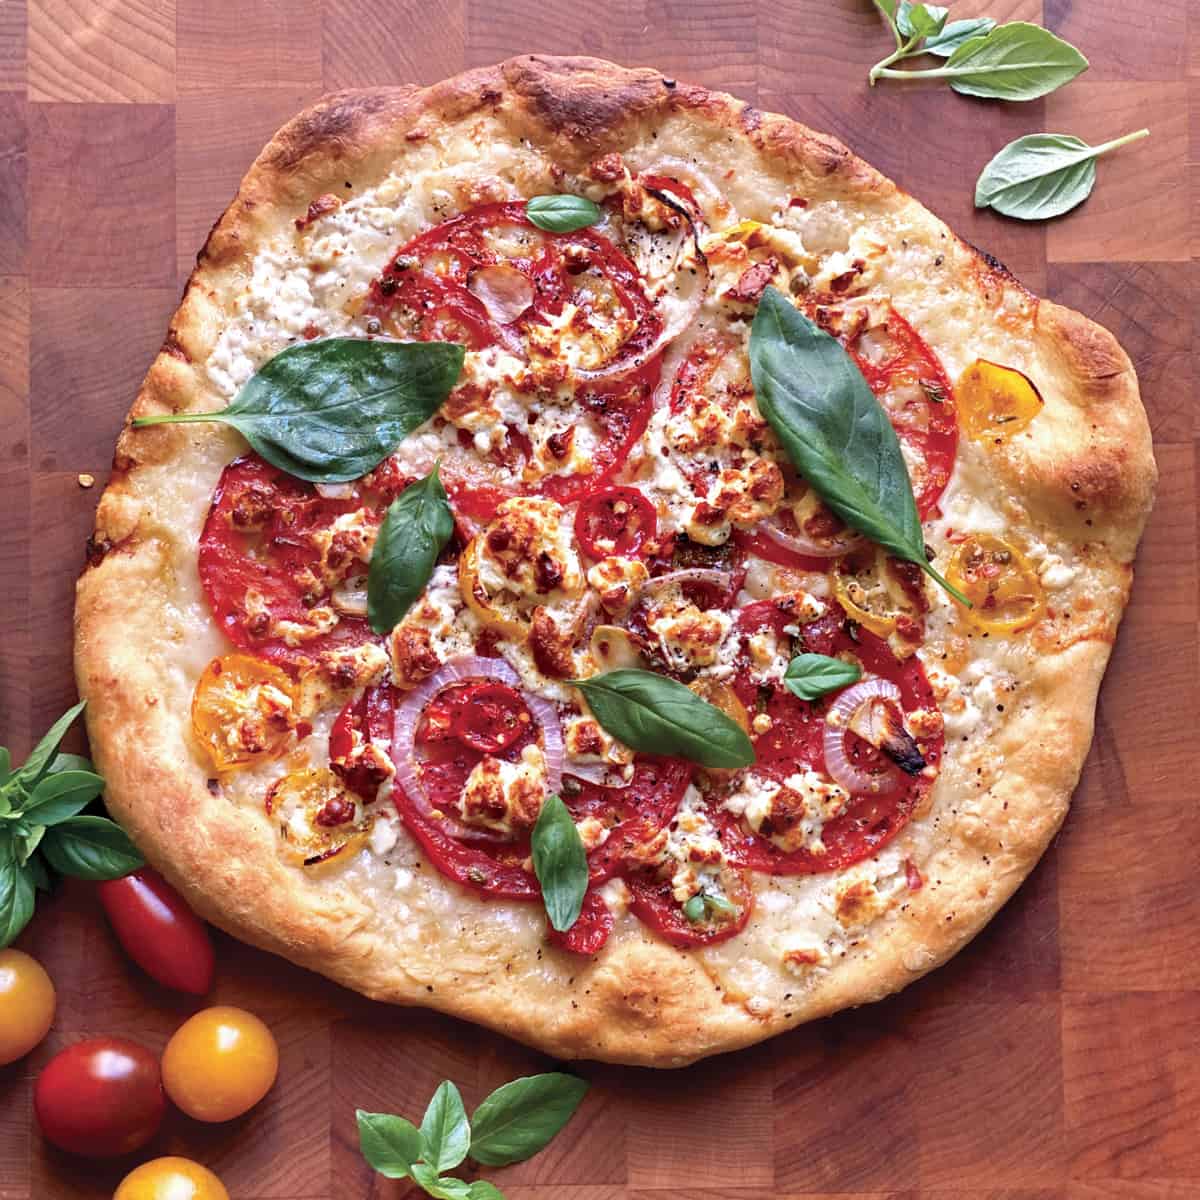 Feta Pizza With Tomato and Basil